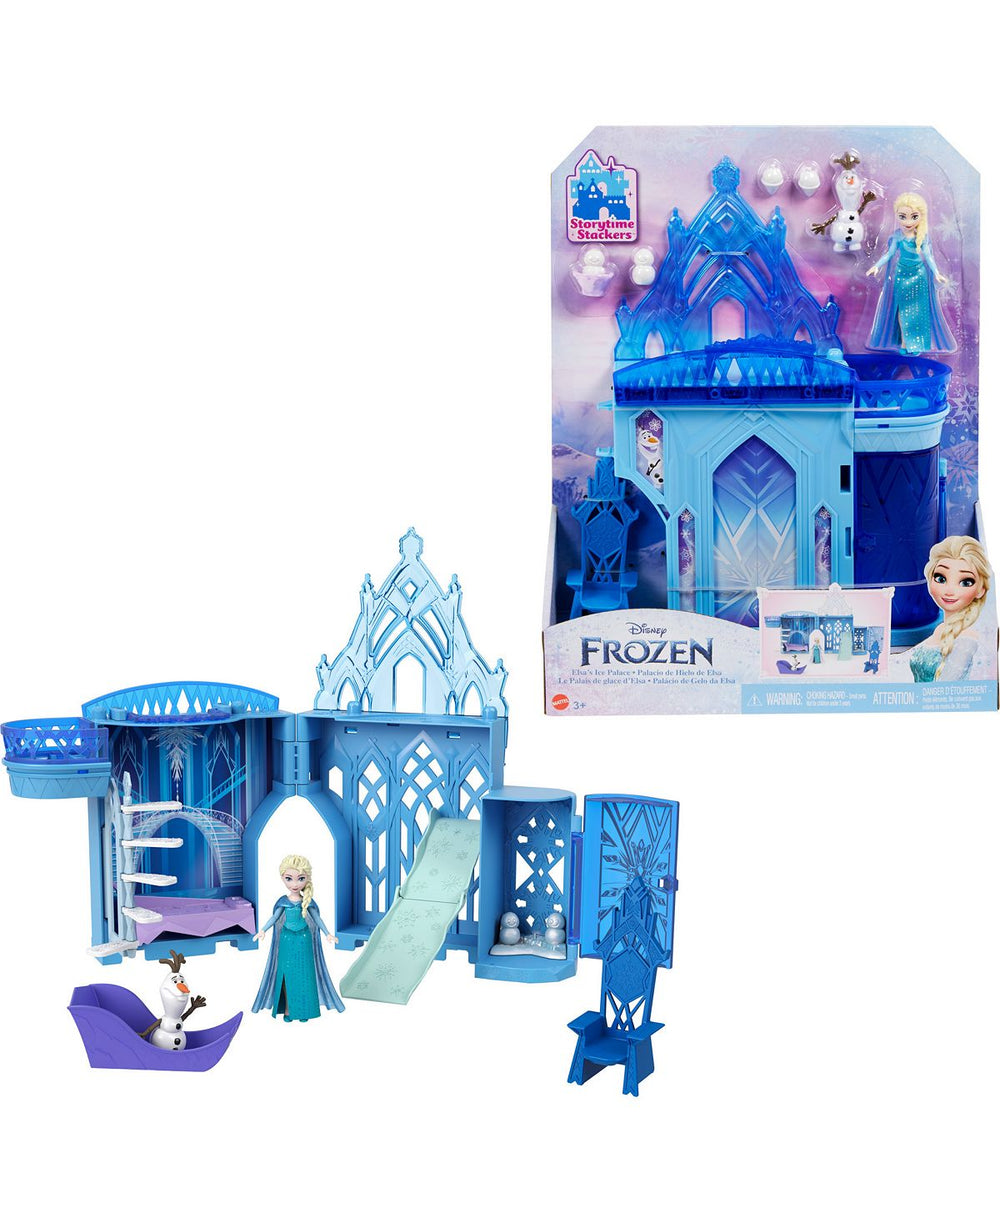 Disney Frozen Storytime Stackers - Elsa's Ice Palace Playset